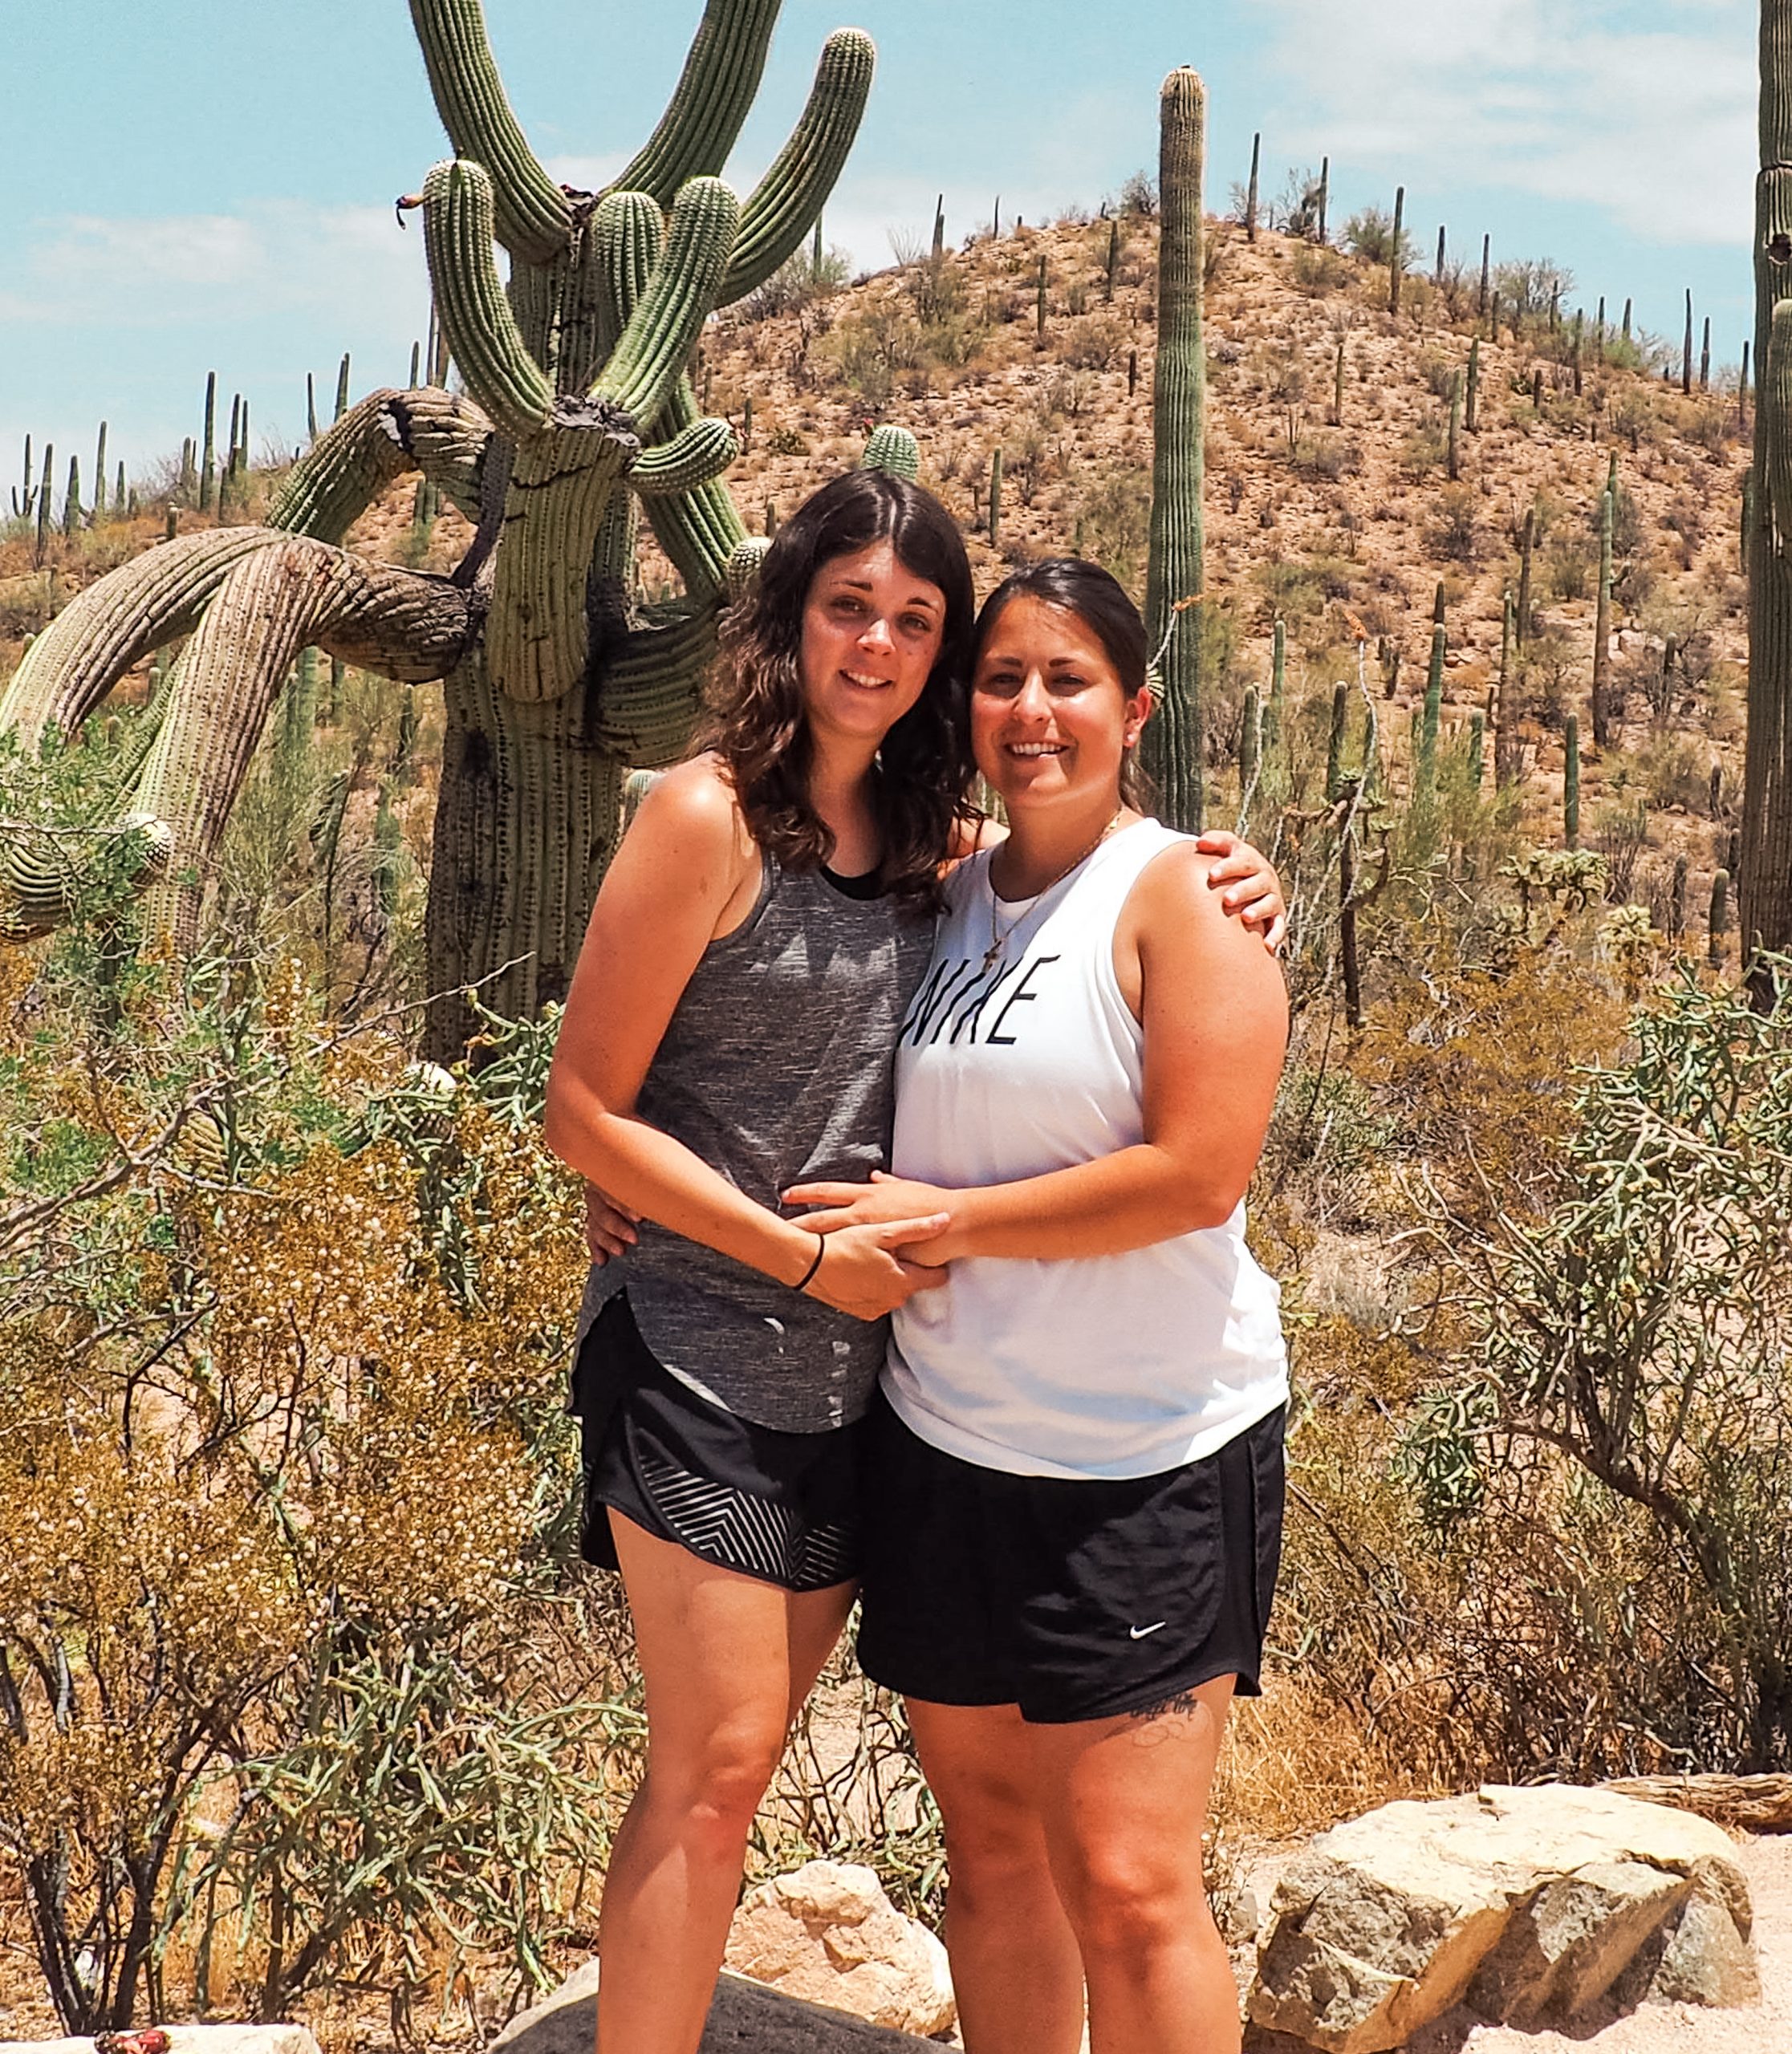 Us standing in front of a Saguaro cactus in Saguaro National Park